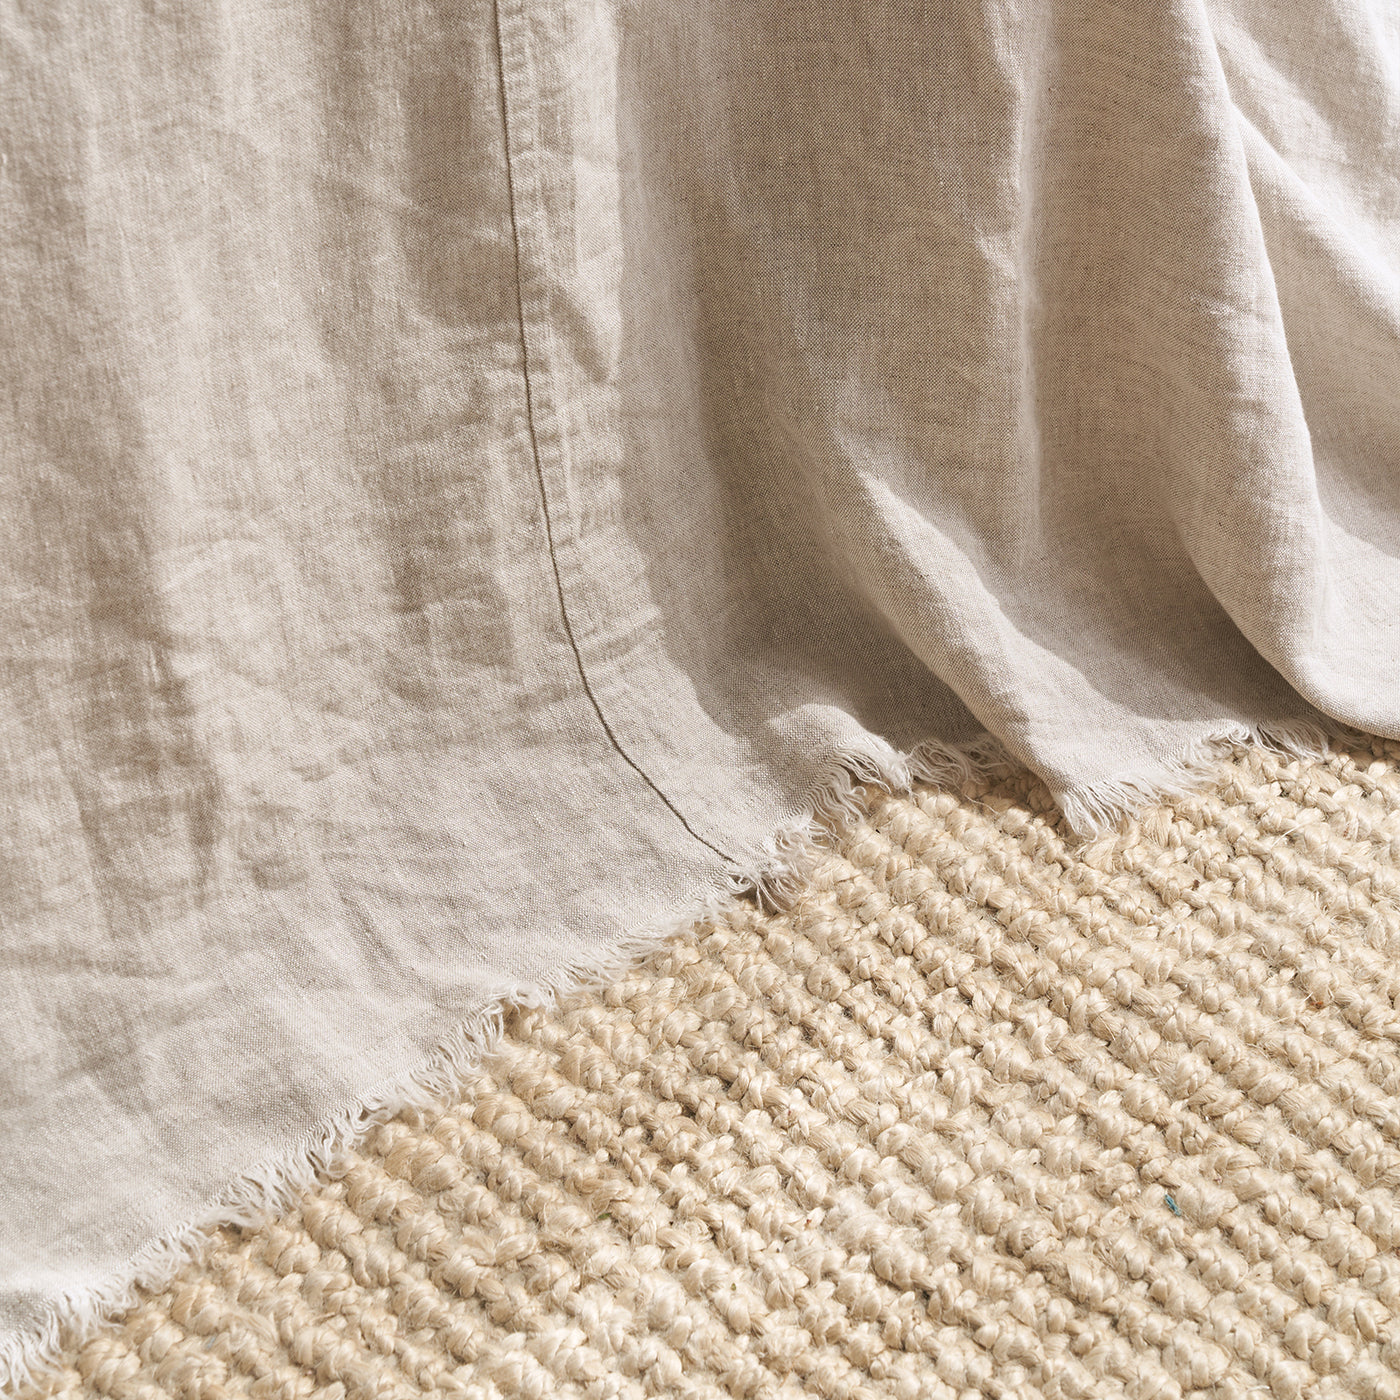 French Flax Linen Heavy Bedcover in Natural